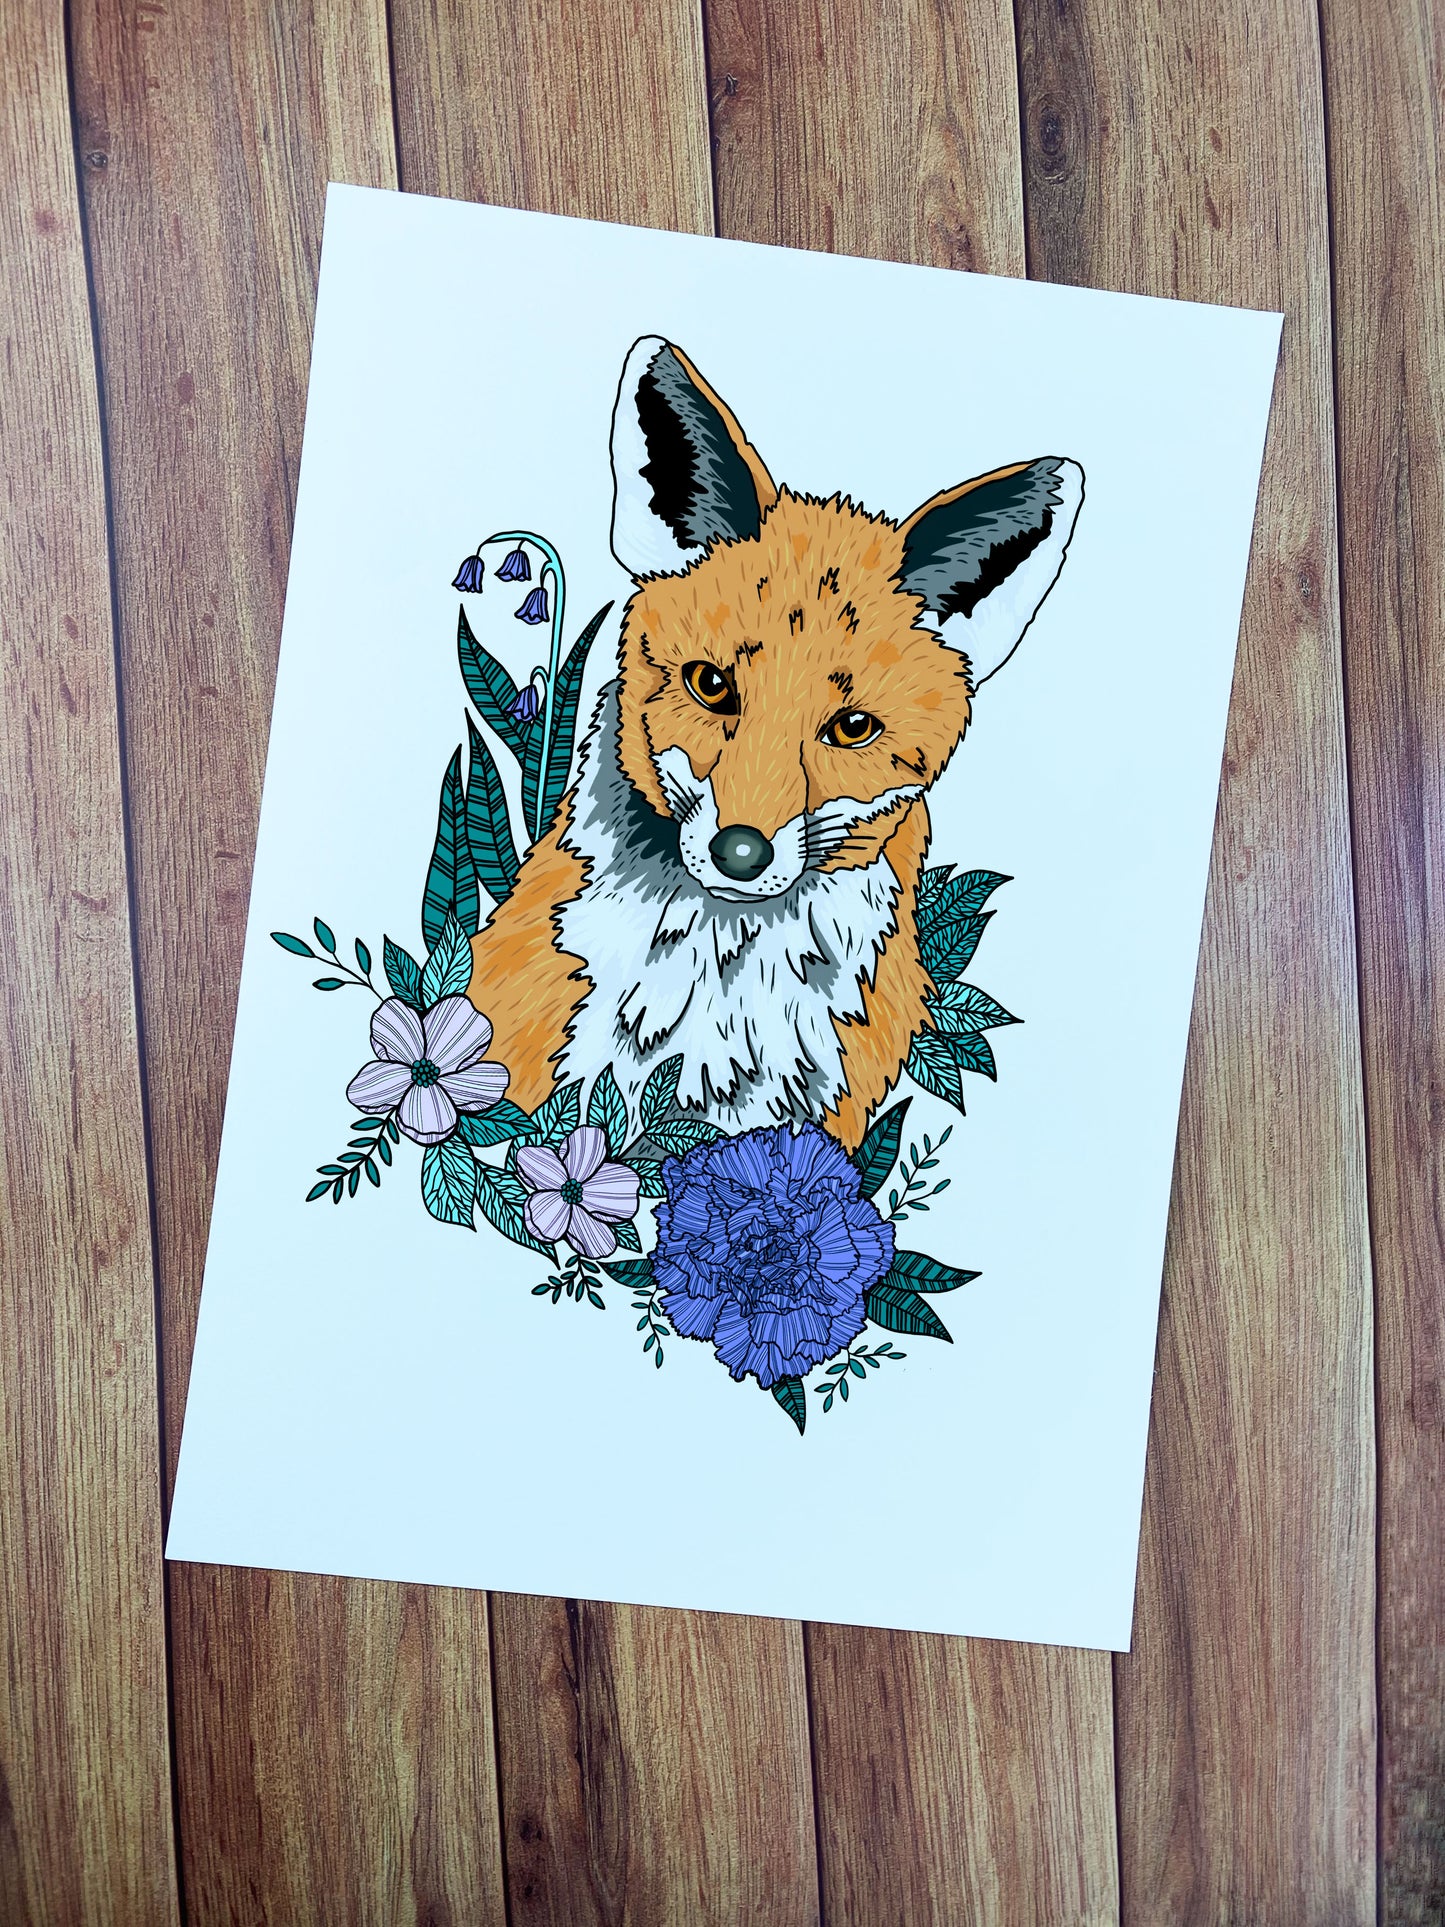 An a4 print art showing a fox and flowers around it. The a4 print is ideal for wall art in the living room or bedroom.